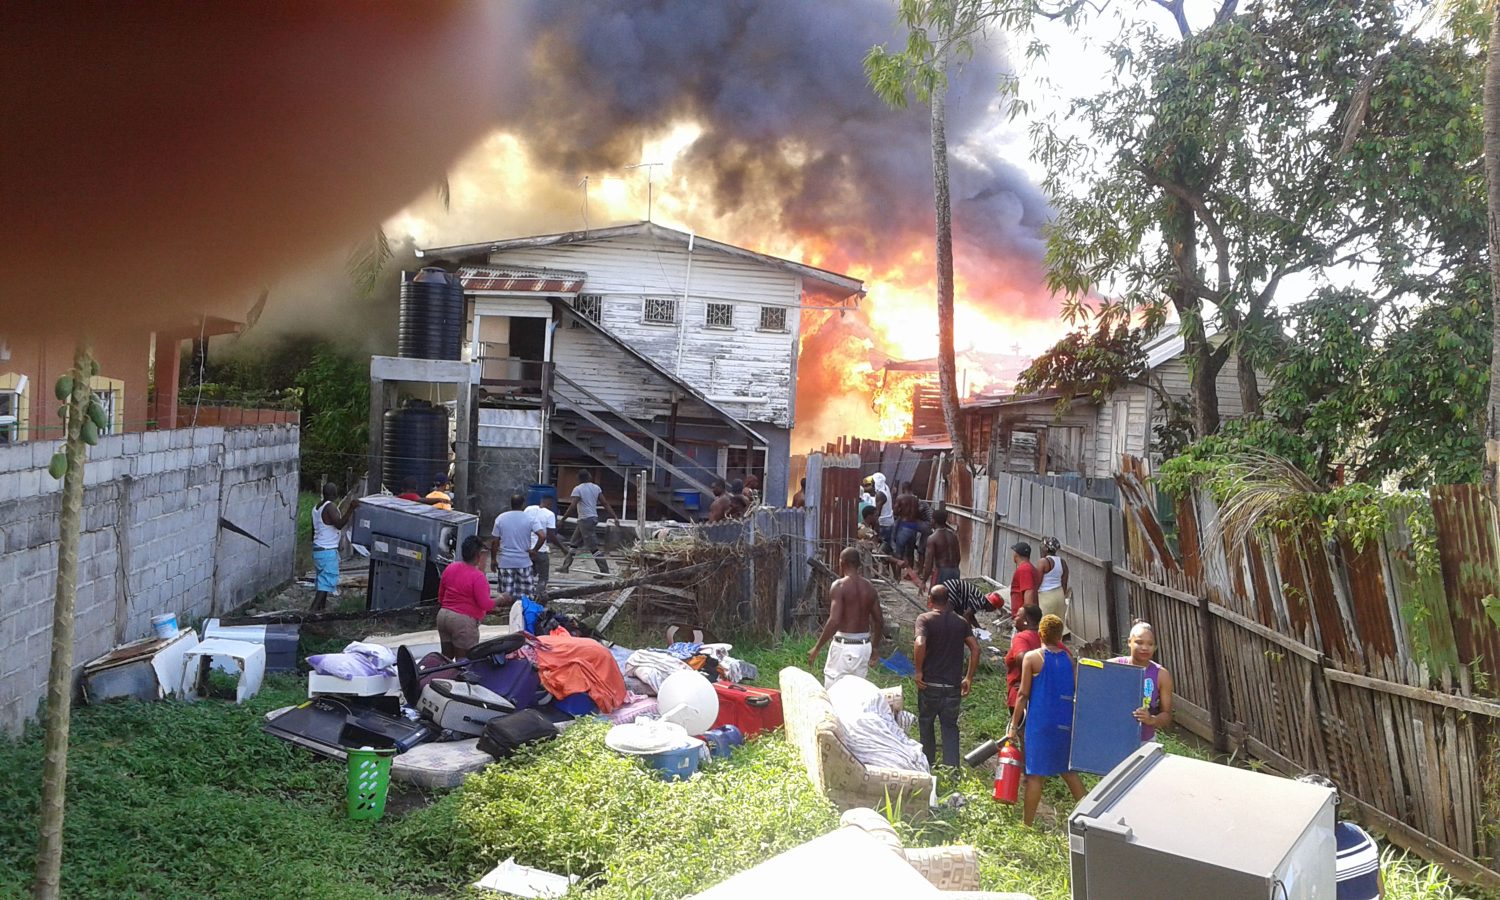 Residents helping to remove items from the burning houses.